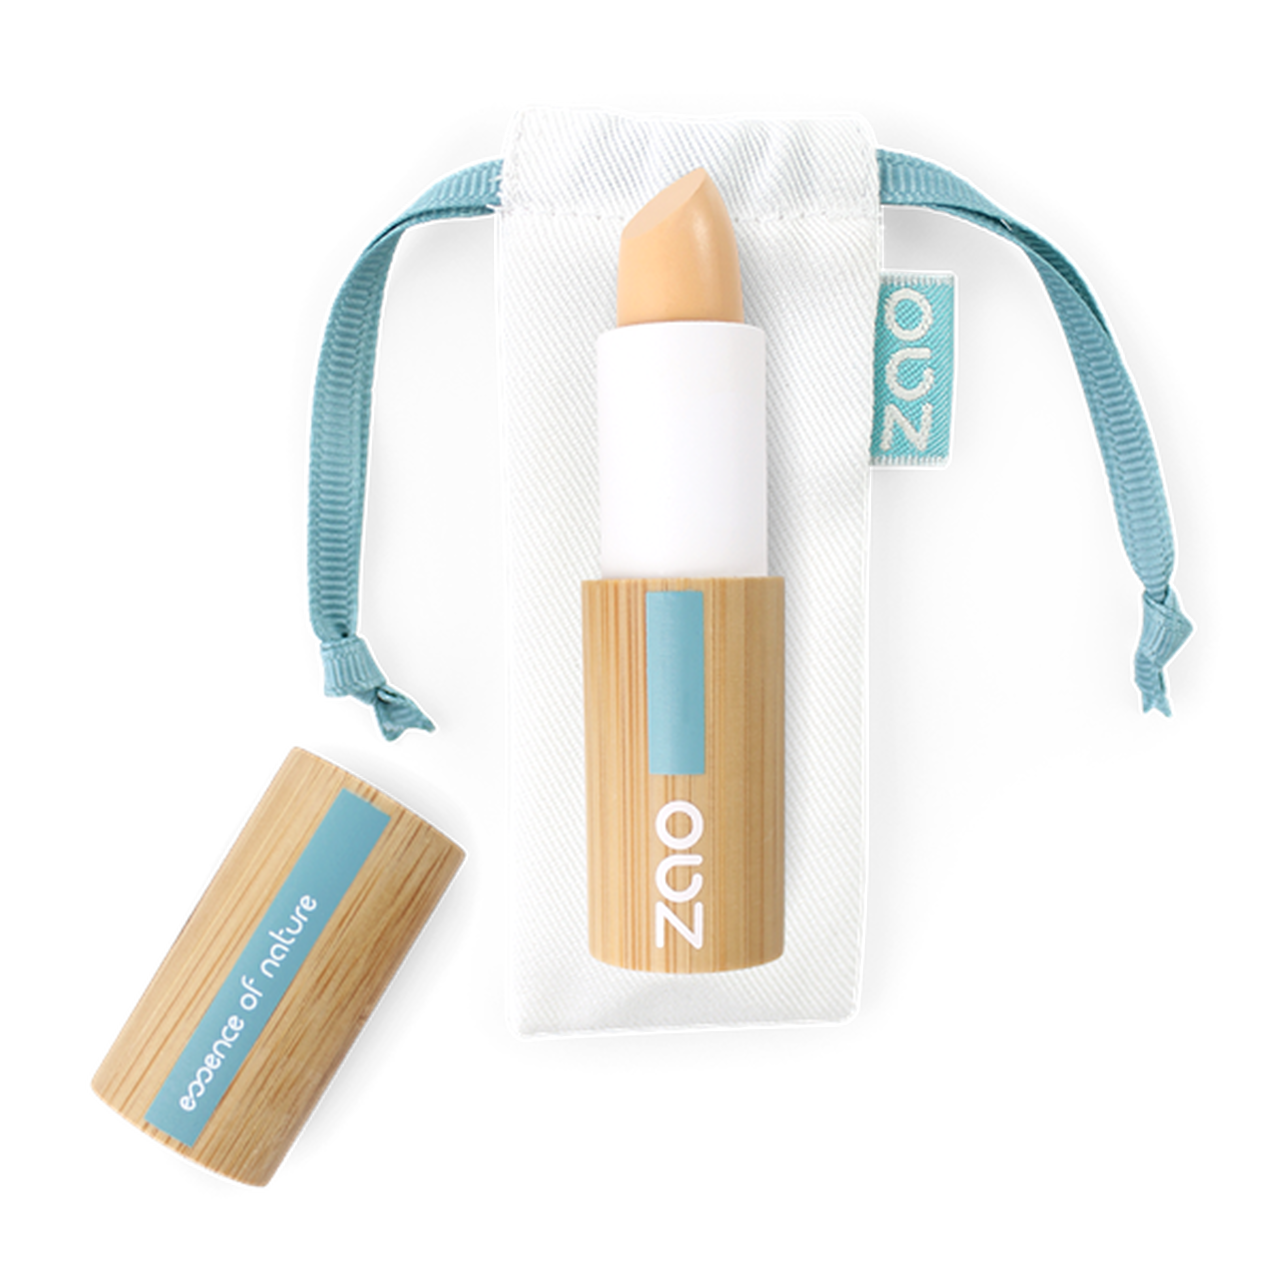 Zao concealer provides natural looking coverage to help conceal blemishes and imperfections | Sustainable Low Waste Makeup | Cruelty Free